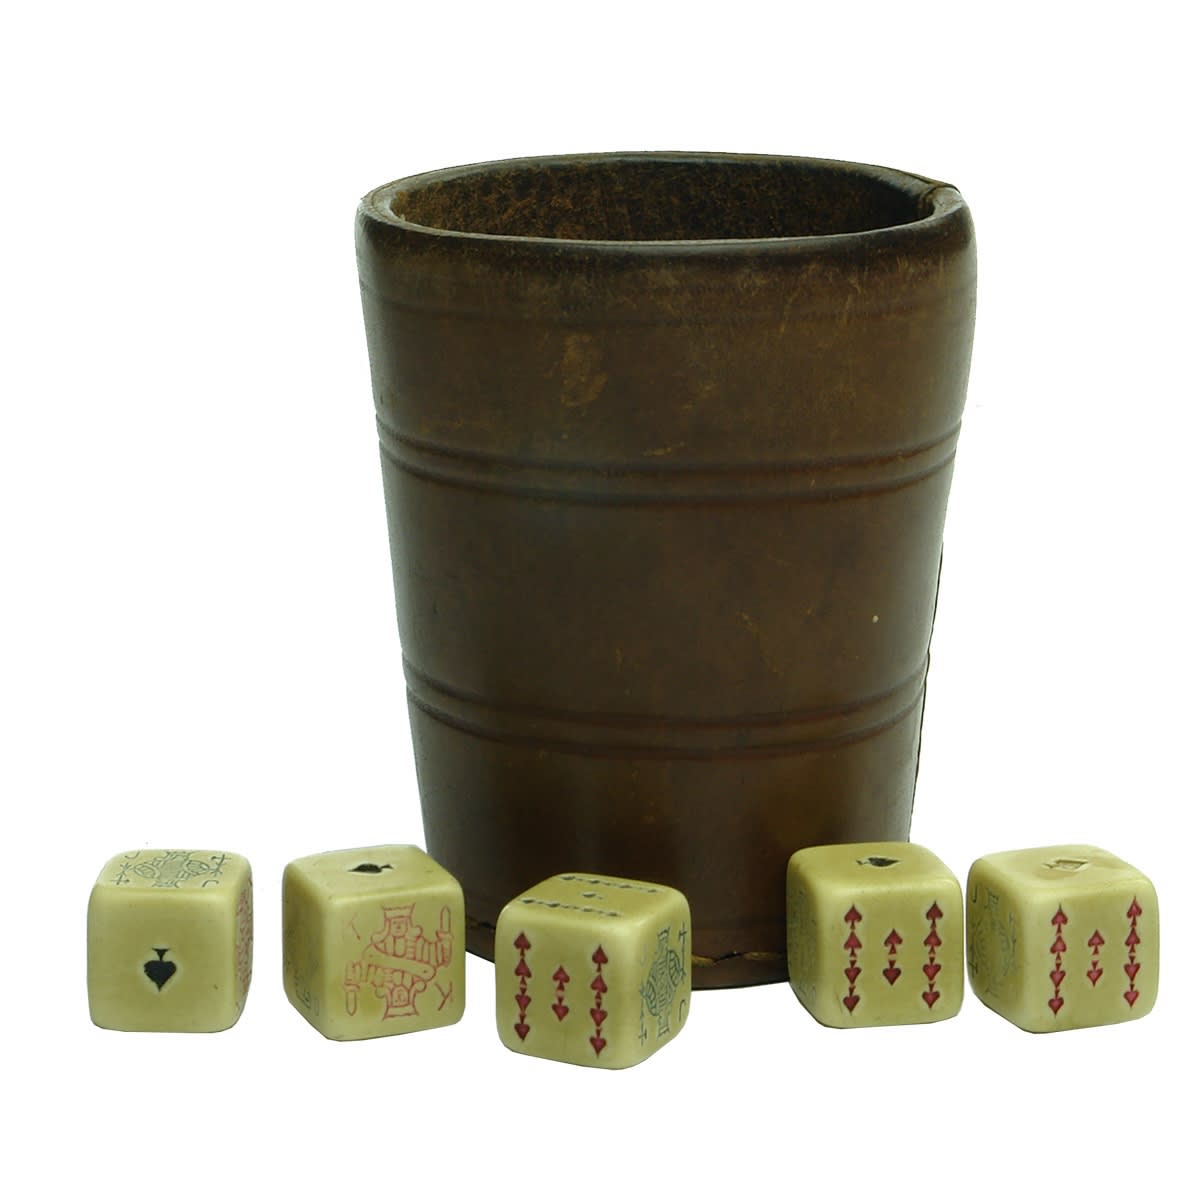 Leather Cup with 5 bone dice. Each die has 9 to Ace in different suits on each side.